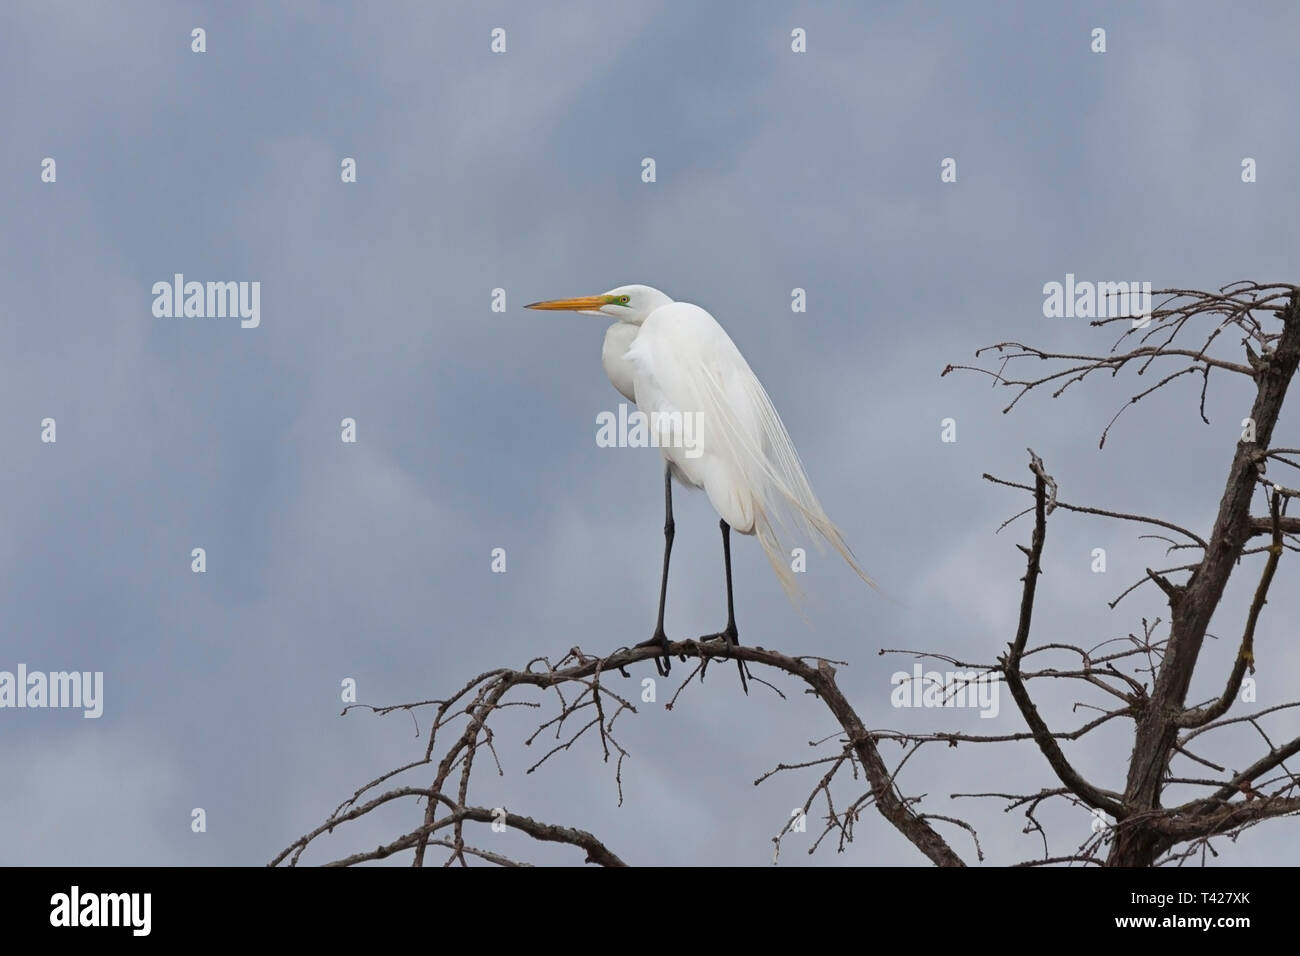 A great egret balances itself on top of a barren tree during an approaching storm.  Its neon green skin and long flowing back plumes are a telltale si Stock Photo